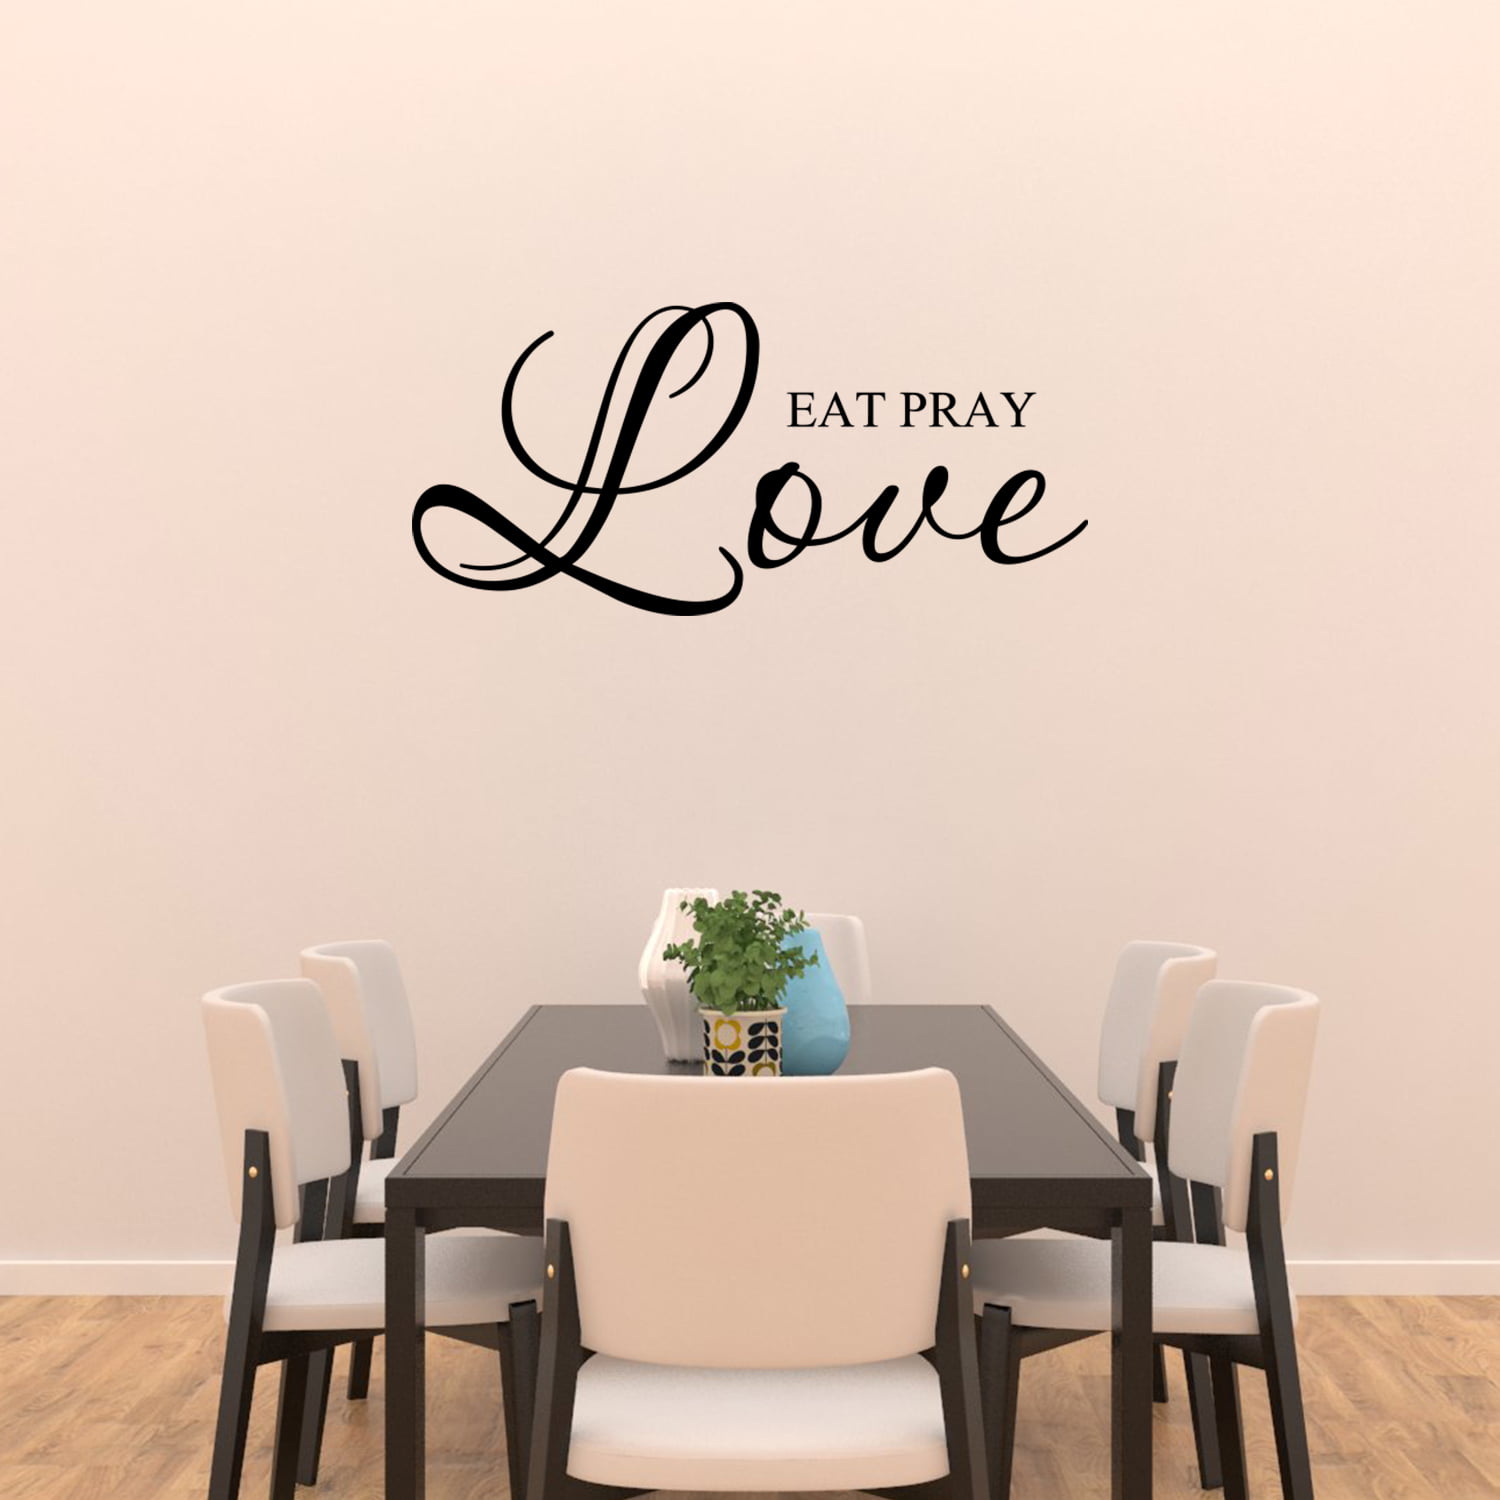 Wall Decal Quote Eat Pray Love Home Sticker Decor C108-L 